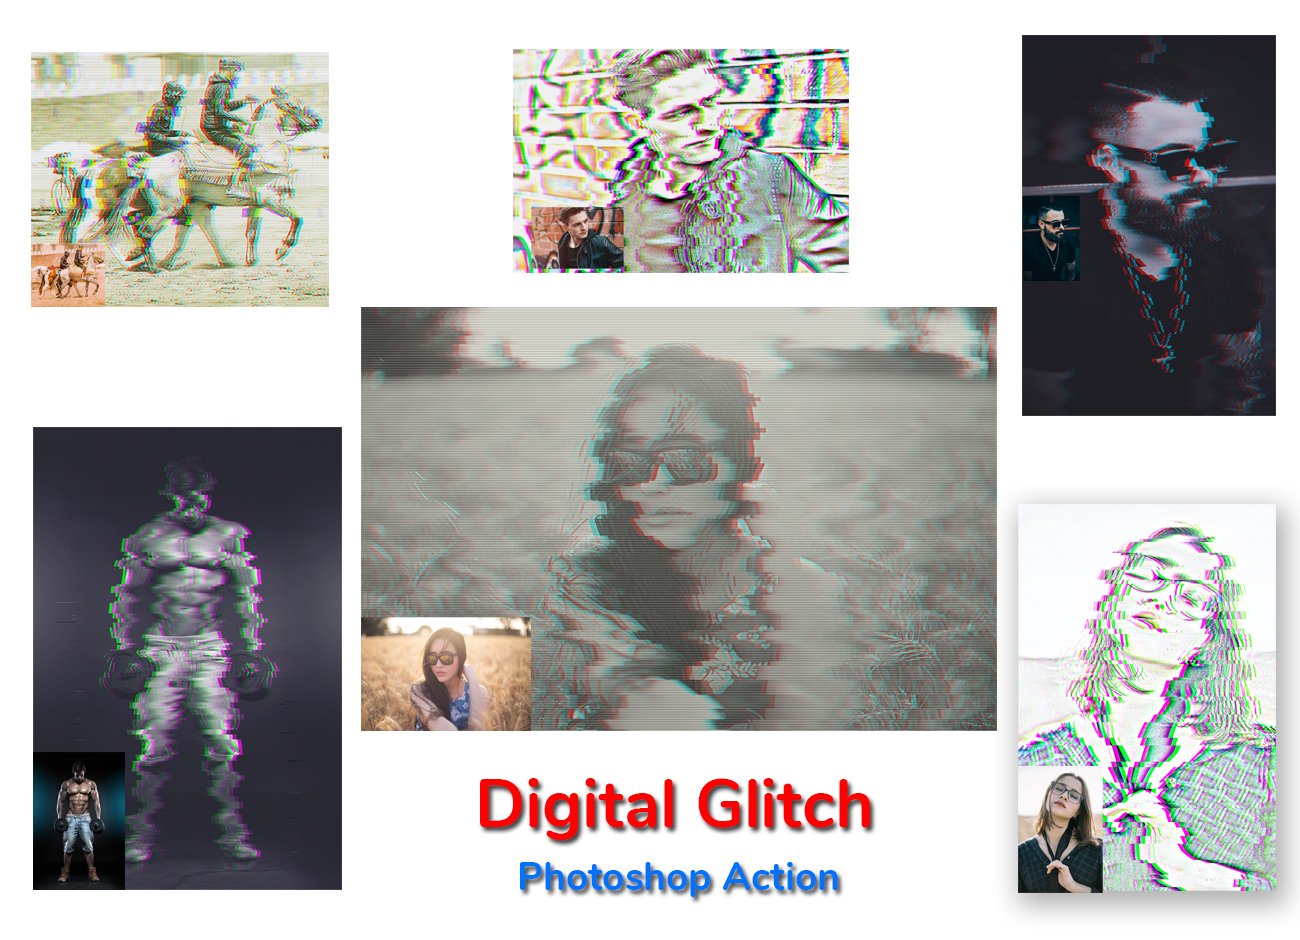 Digital Glitch Photoshop Actioncover image.